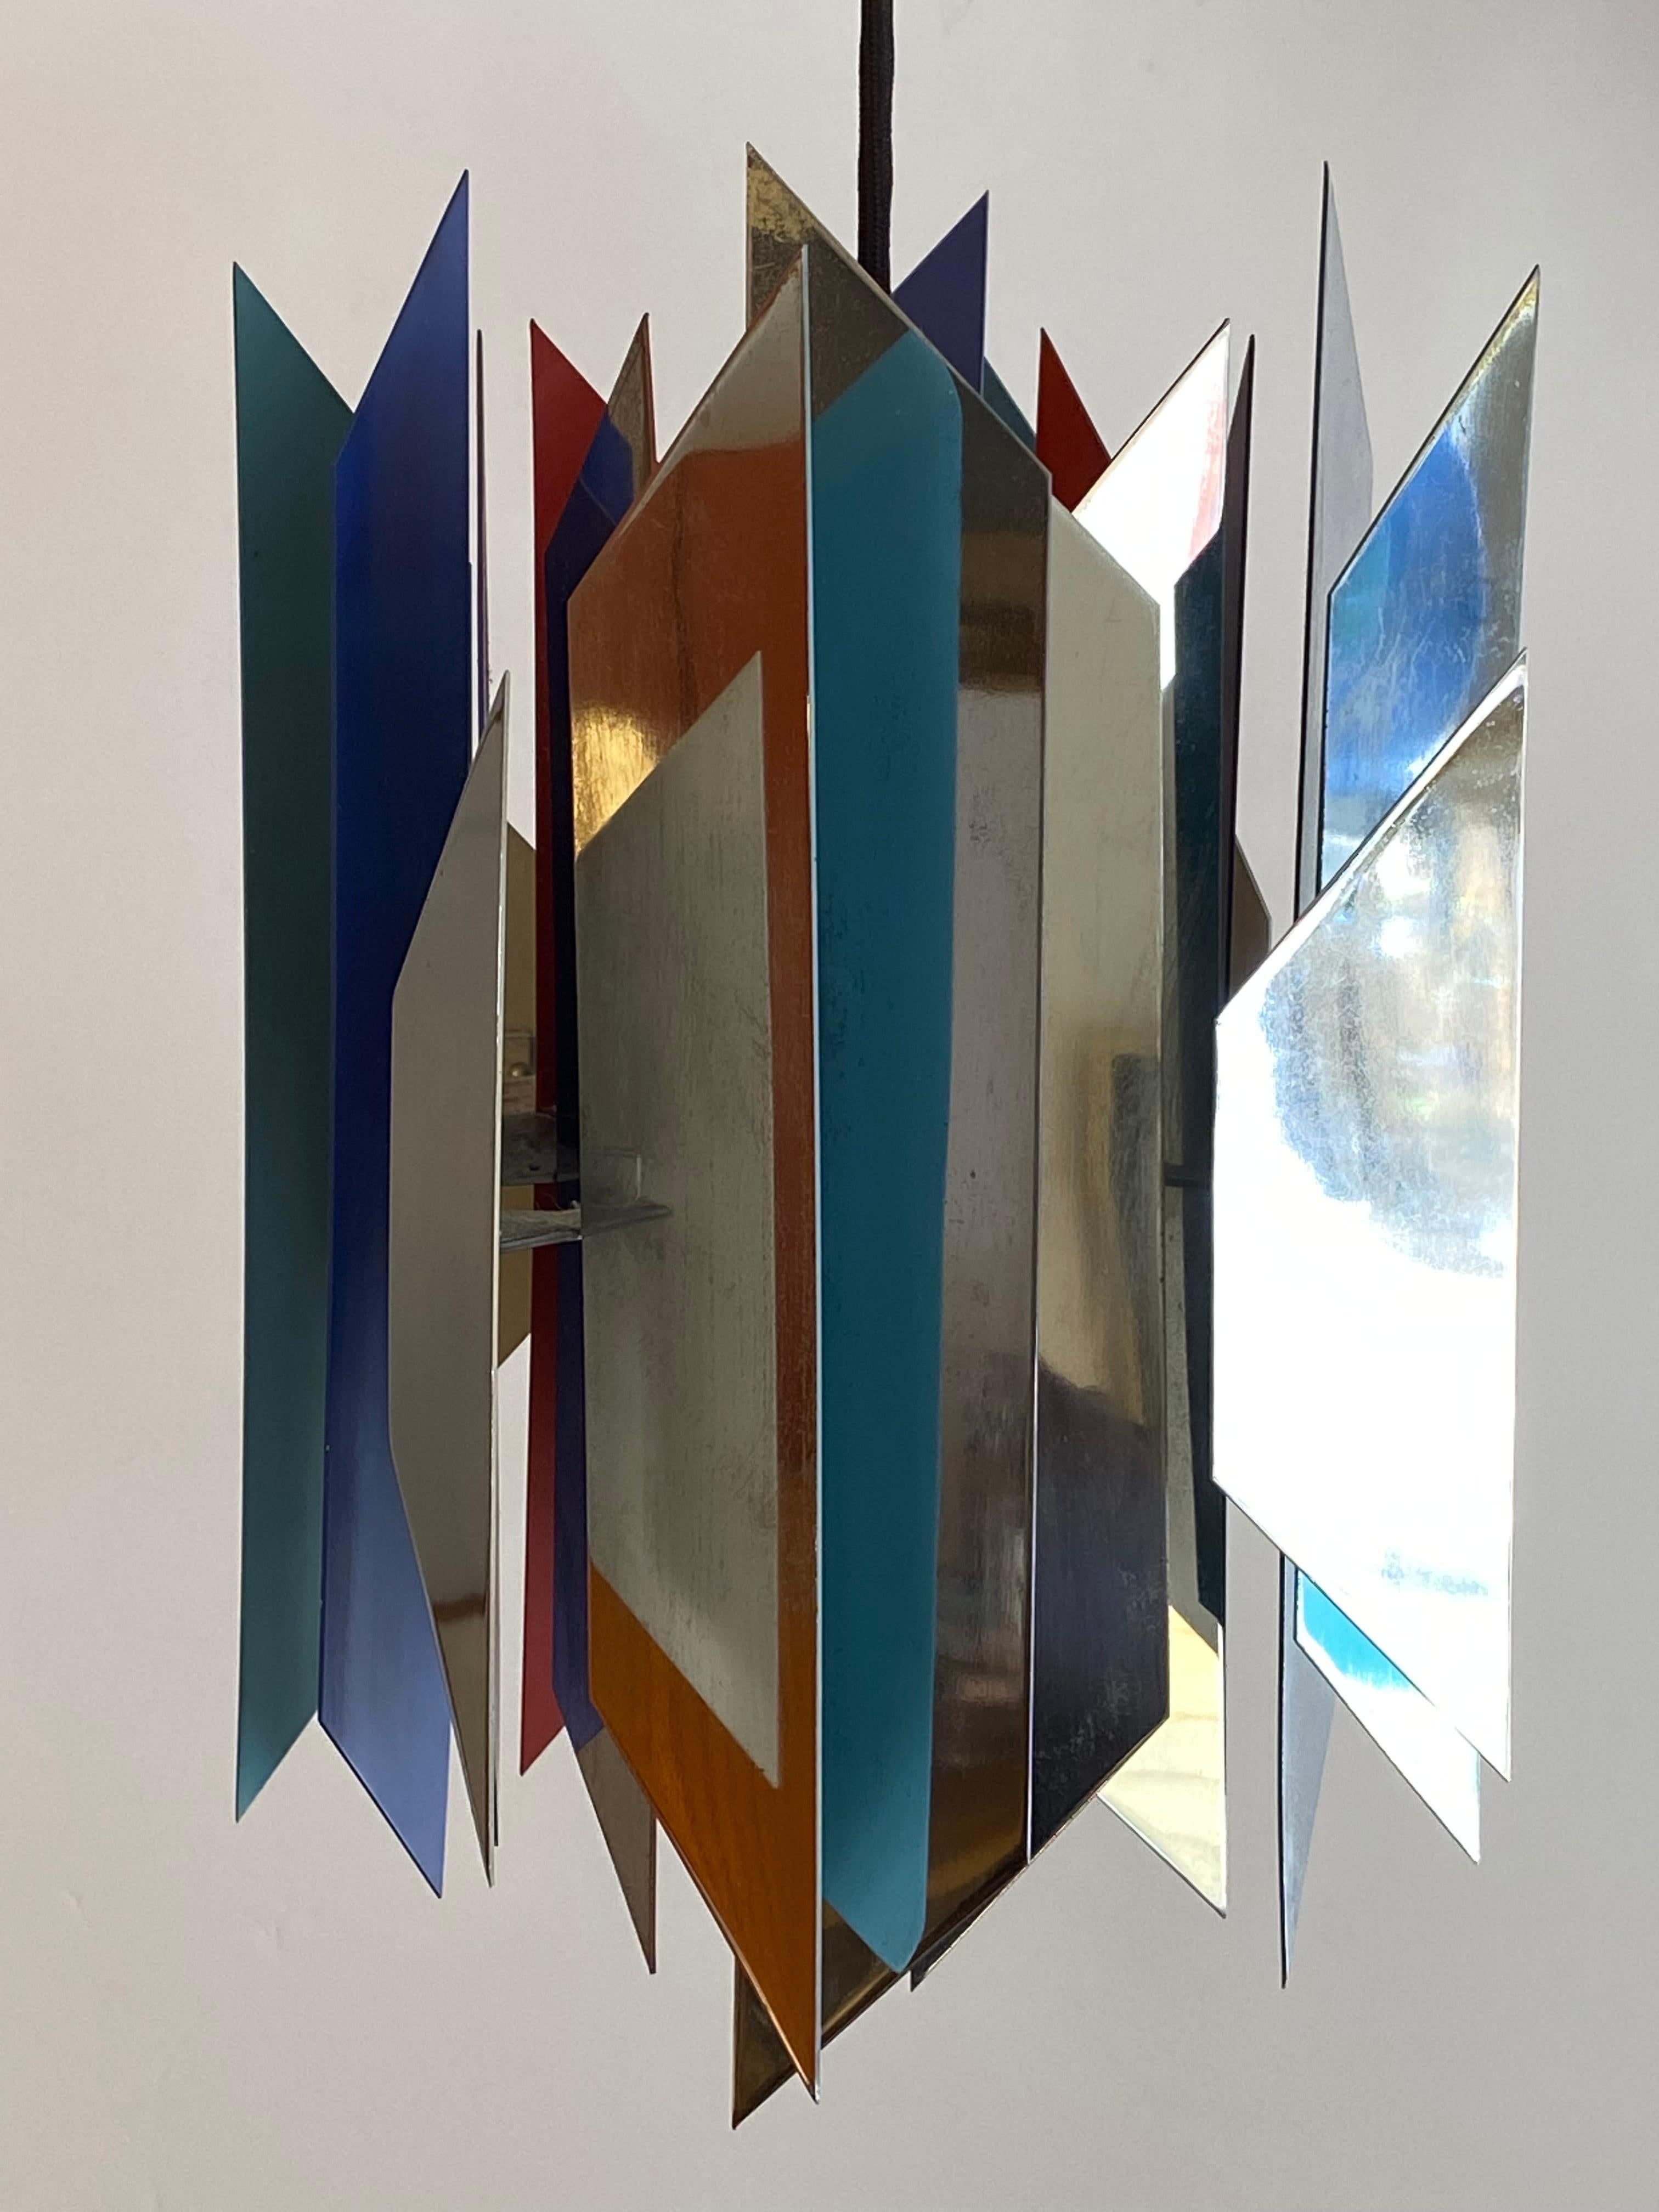 Soren Henningsen ceiling fixture, sold through Georg Jensen. 4 sided flat chrome finished shapes make up the exterior body of the light. Inside the pieces are painted blue, lilac, red and turquoise. Nice quality of light reflects from the interior